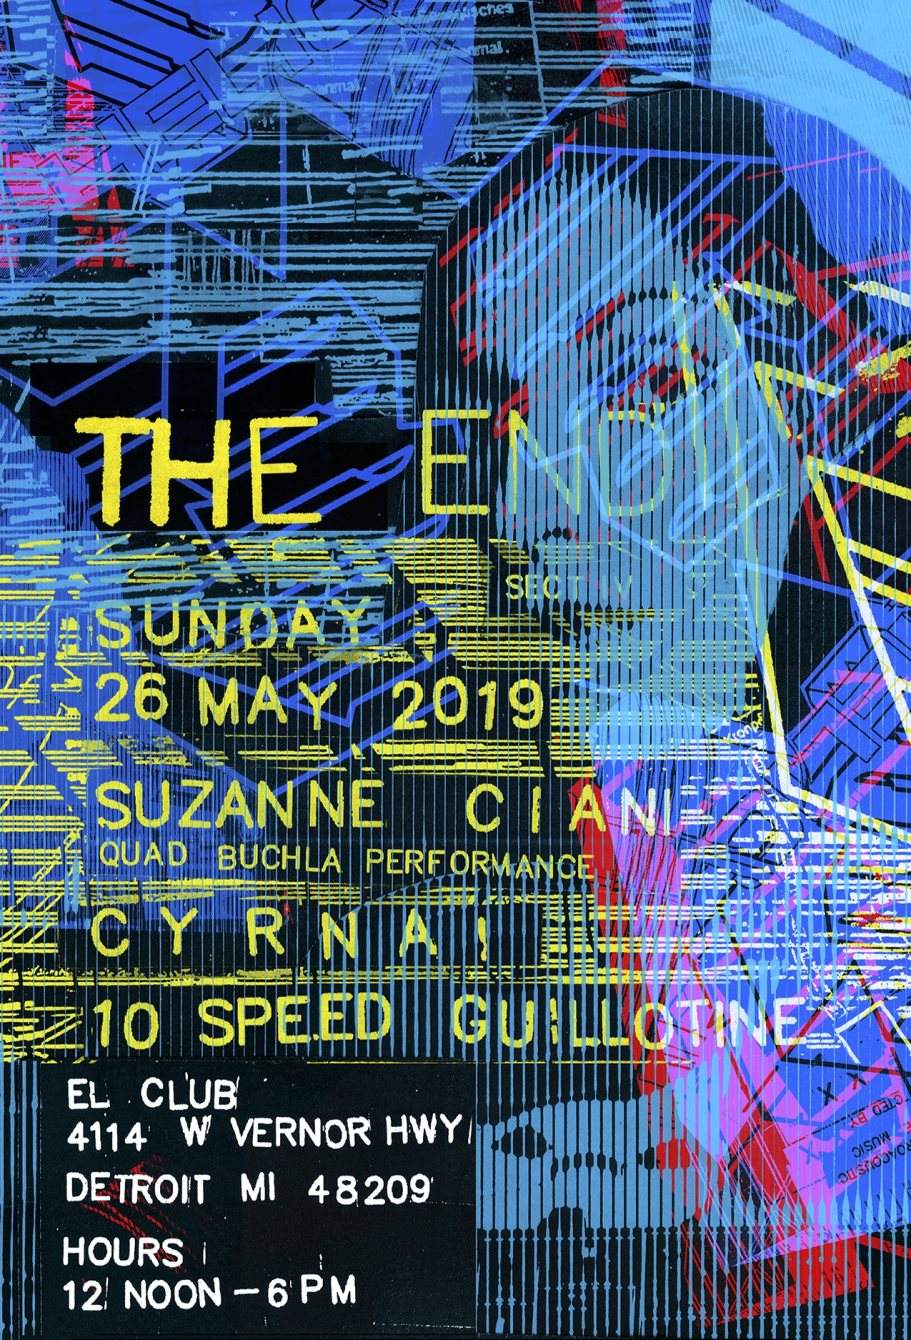 The END Sect IV: Suzanne Ciani, CYRNAI, Traxx - Página frontal